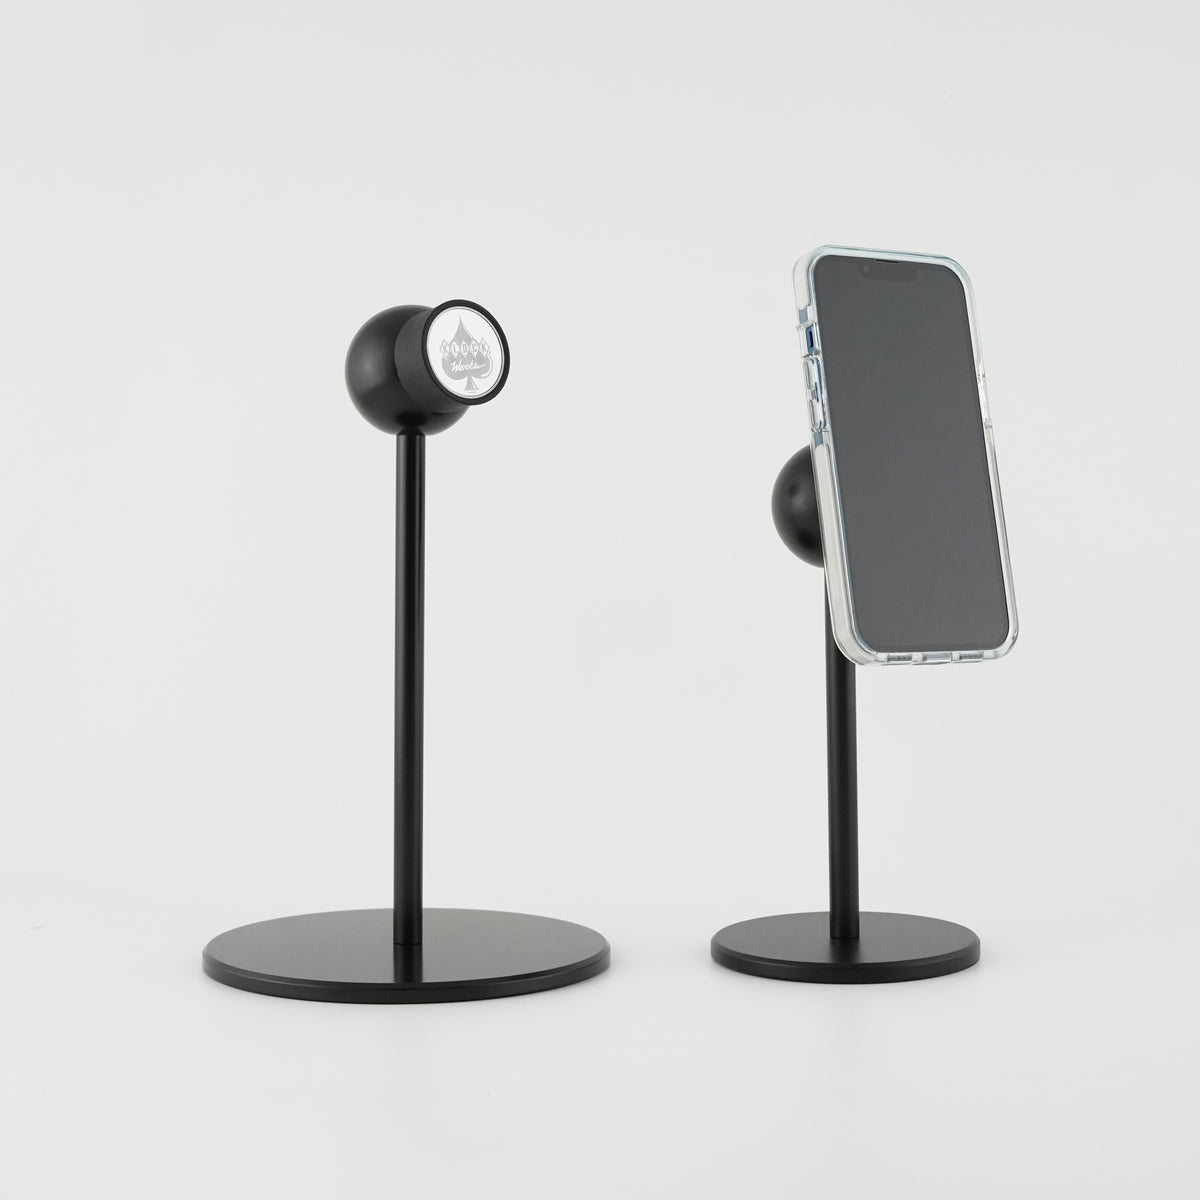 iOstand and iOmini phone mount side-by-side comparisson (iOstand (9.75" Tall) vs. iOmini (7.75"))